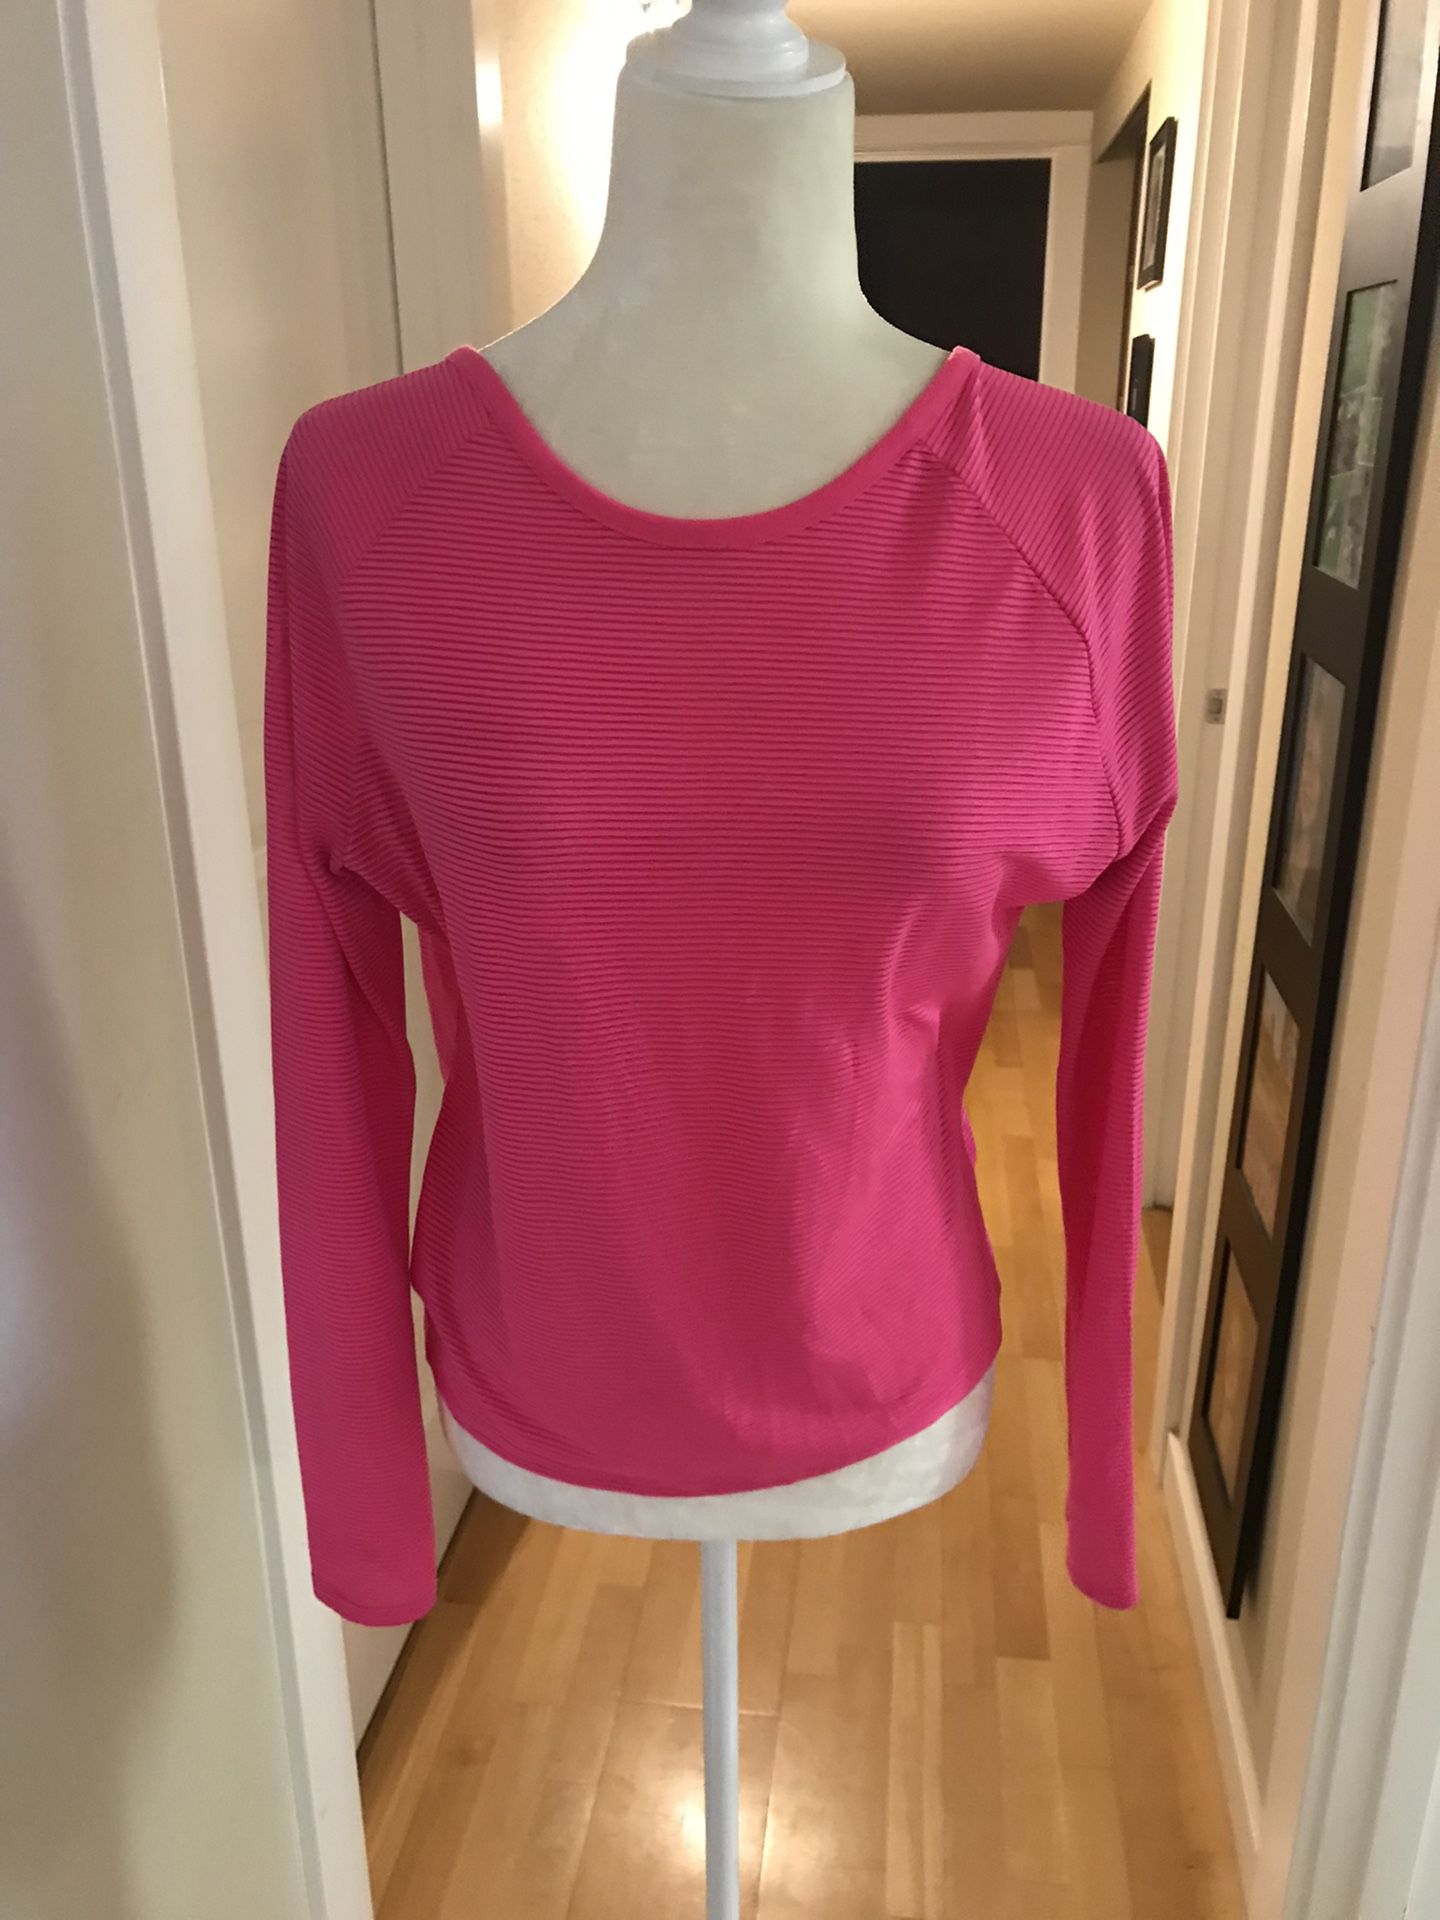 Fabletics Hot pink open back top size small petite